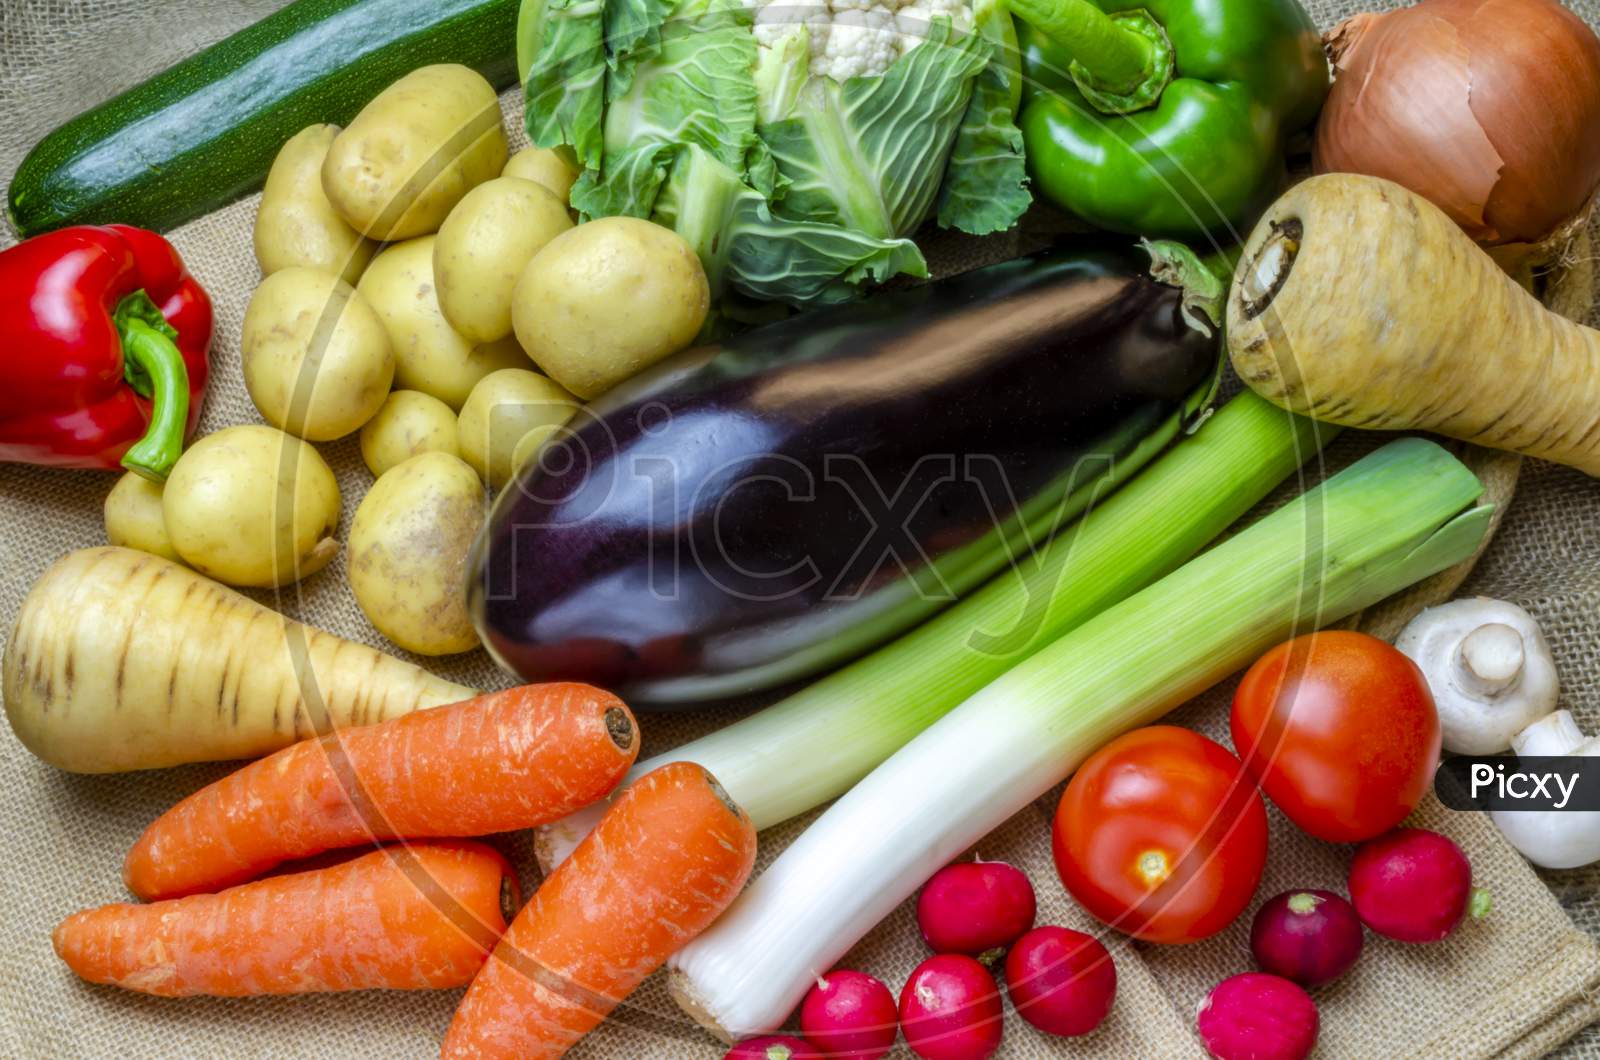 A selection of fresh vegetables ready for preparation